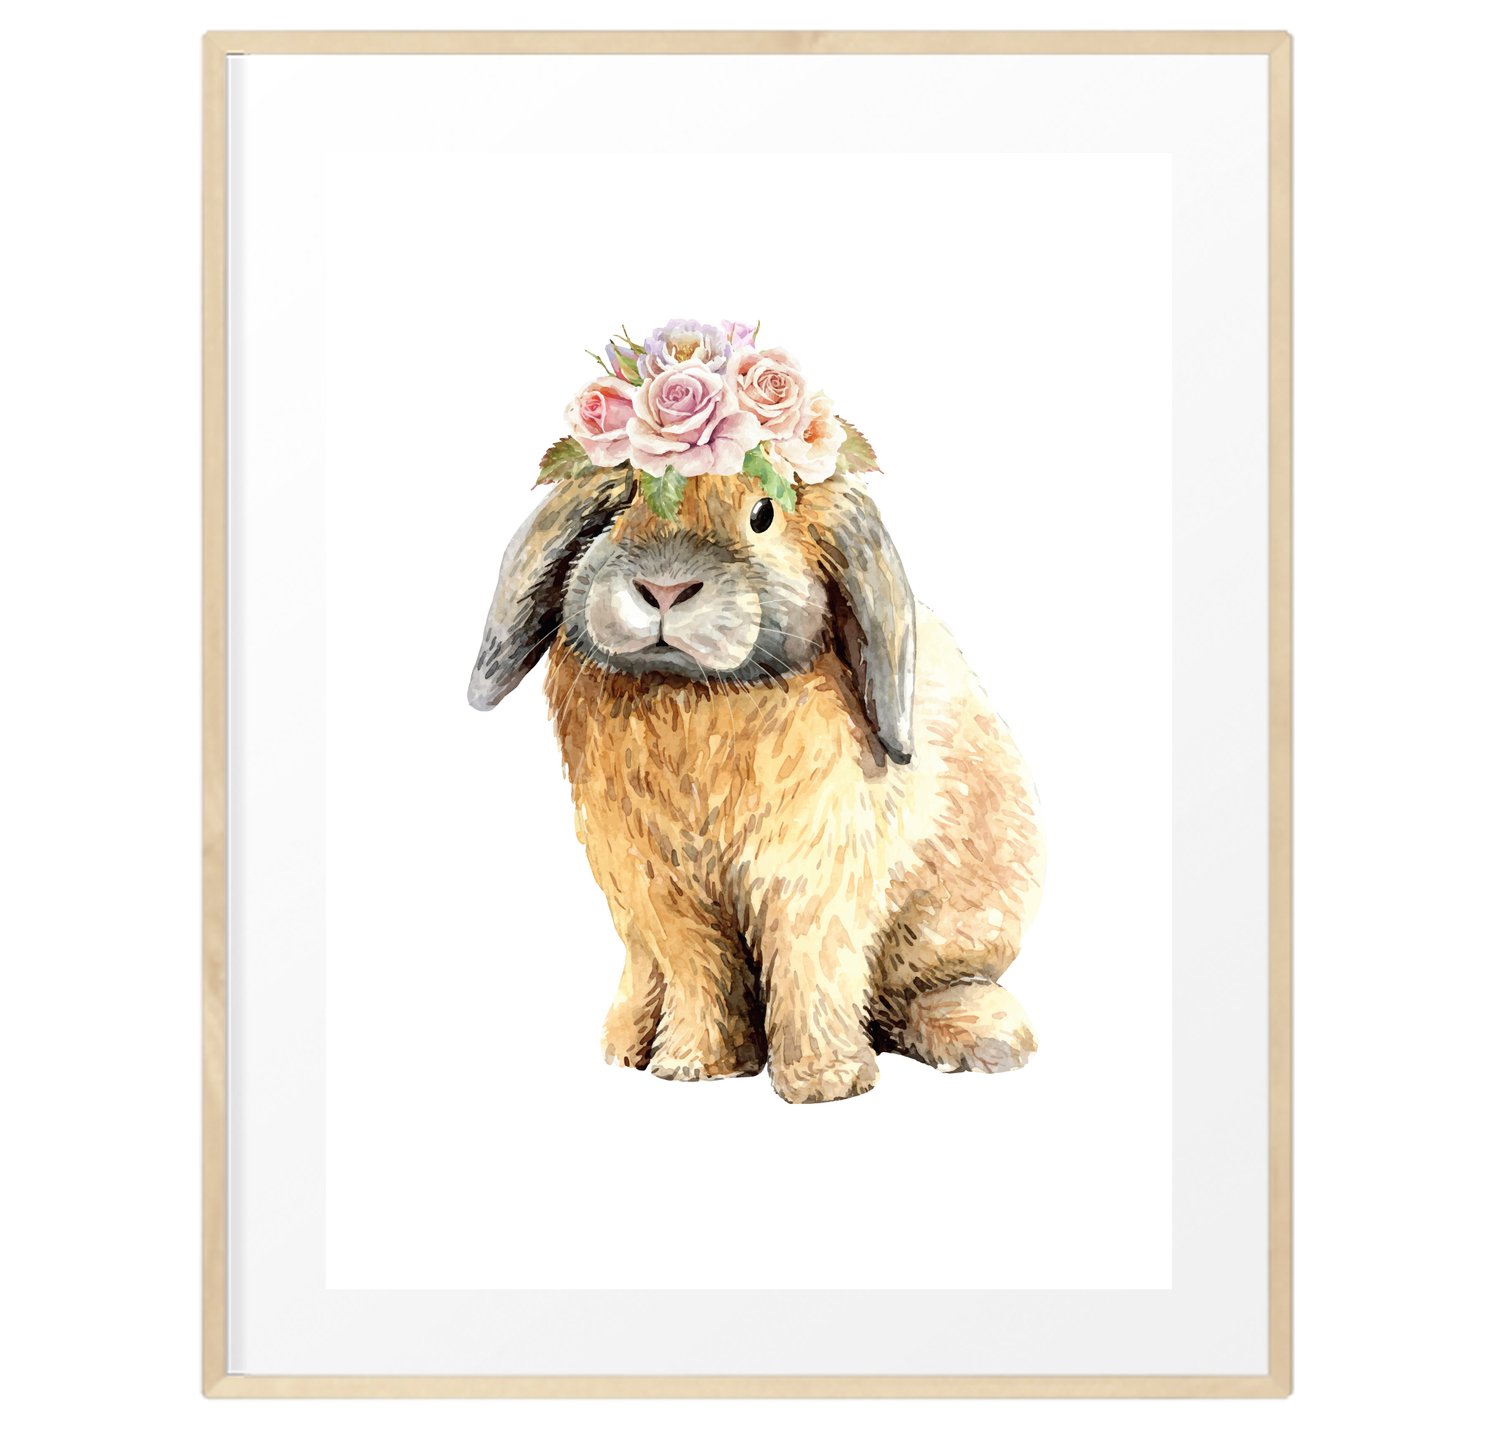 Image of Baby bunny flower crown print